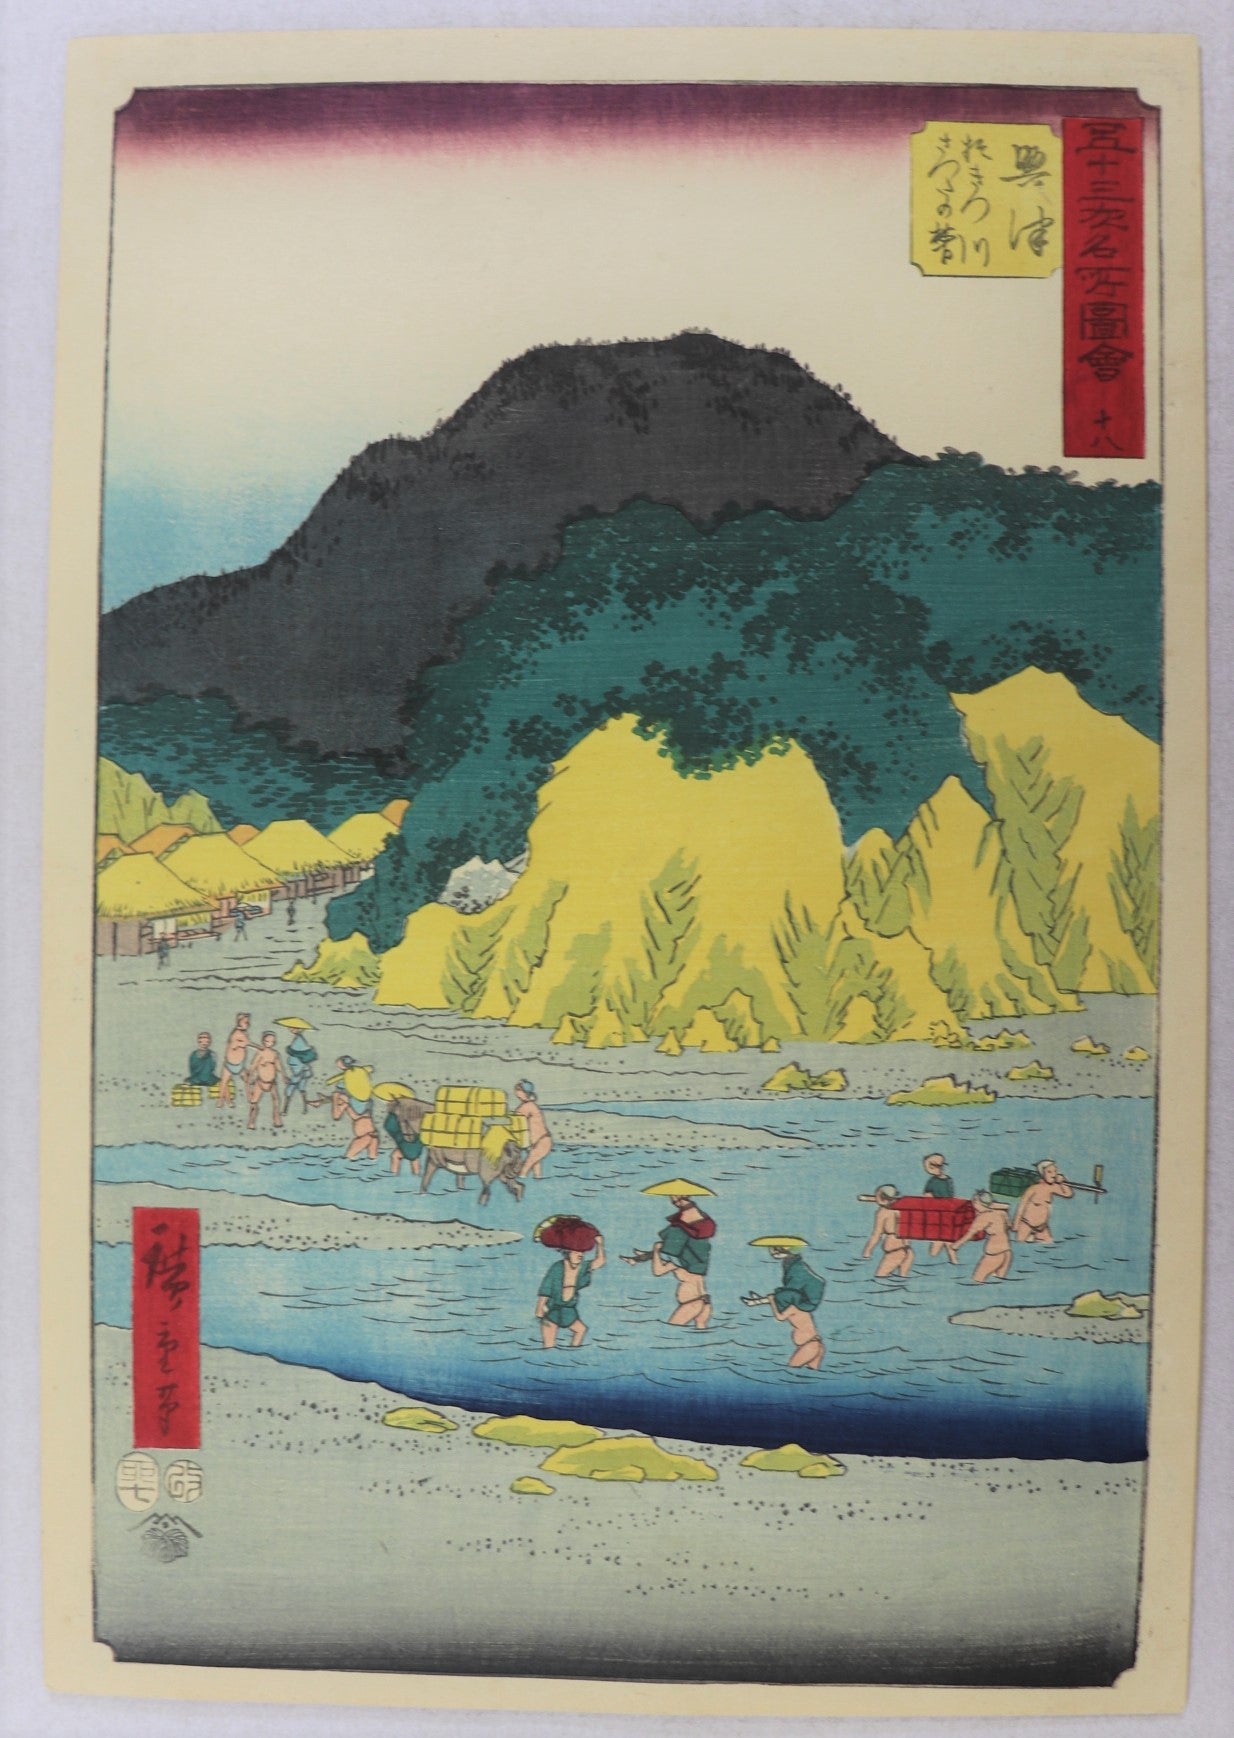 Station of Okitsu from the series " Fifty-three stations of the Tokaido" by Hiroshige / La station d'Okitsu de la série des " 53 stations du Tokaido "par Hiroshige ( 1855)